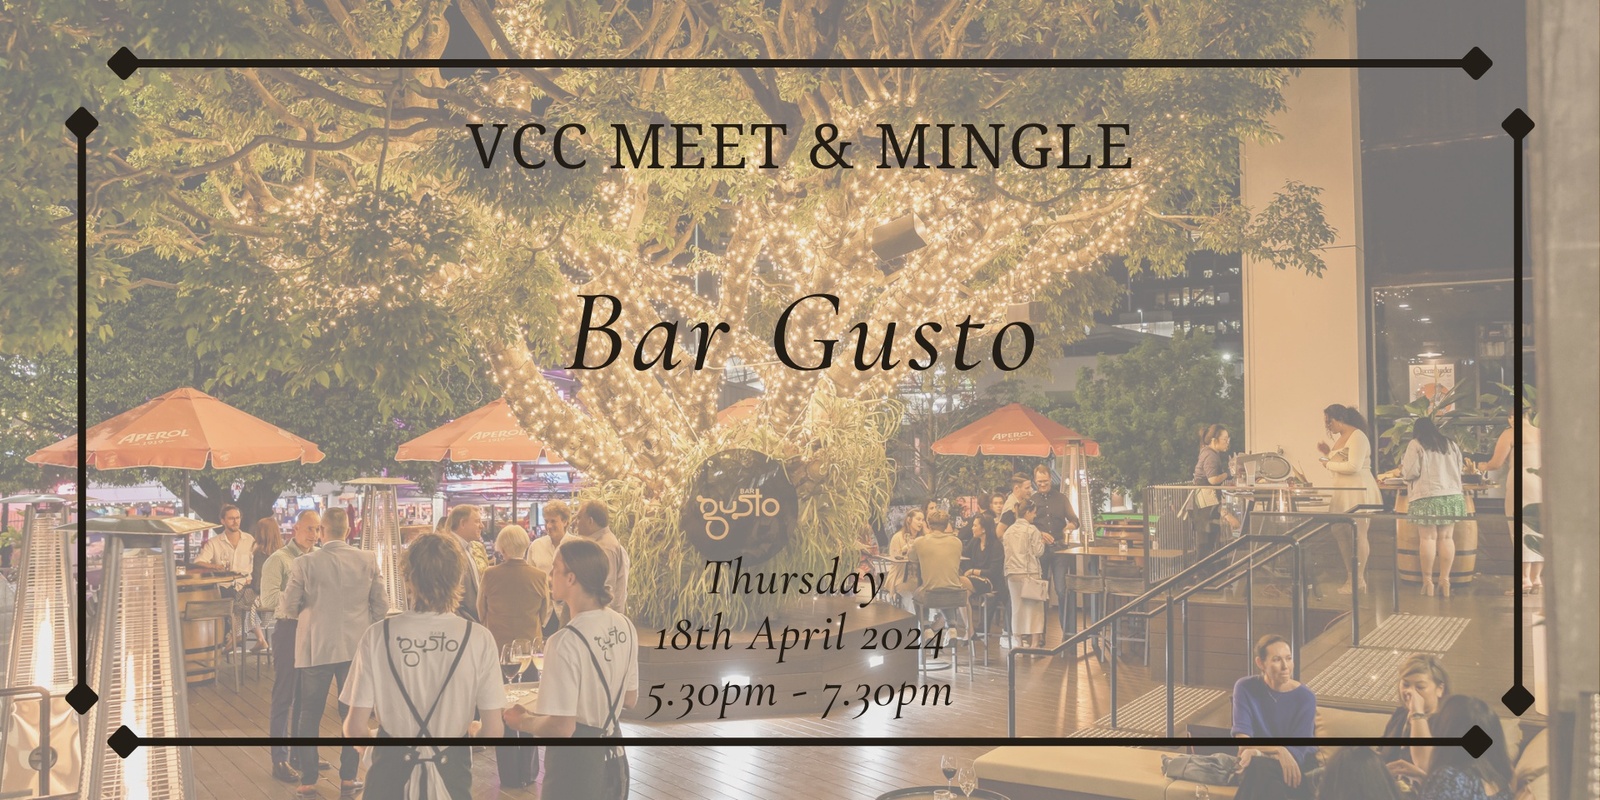 Banner image for Online ticket sales have now ended. VCC Meet & Mingle - Bar Gusto at Rydges Fortitude Valley